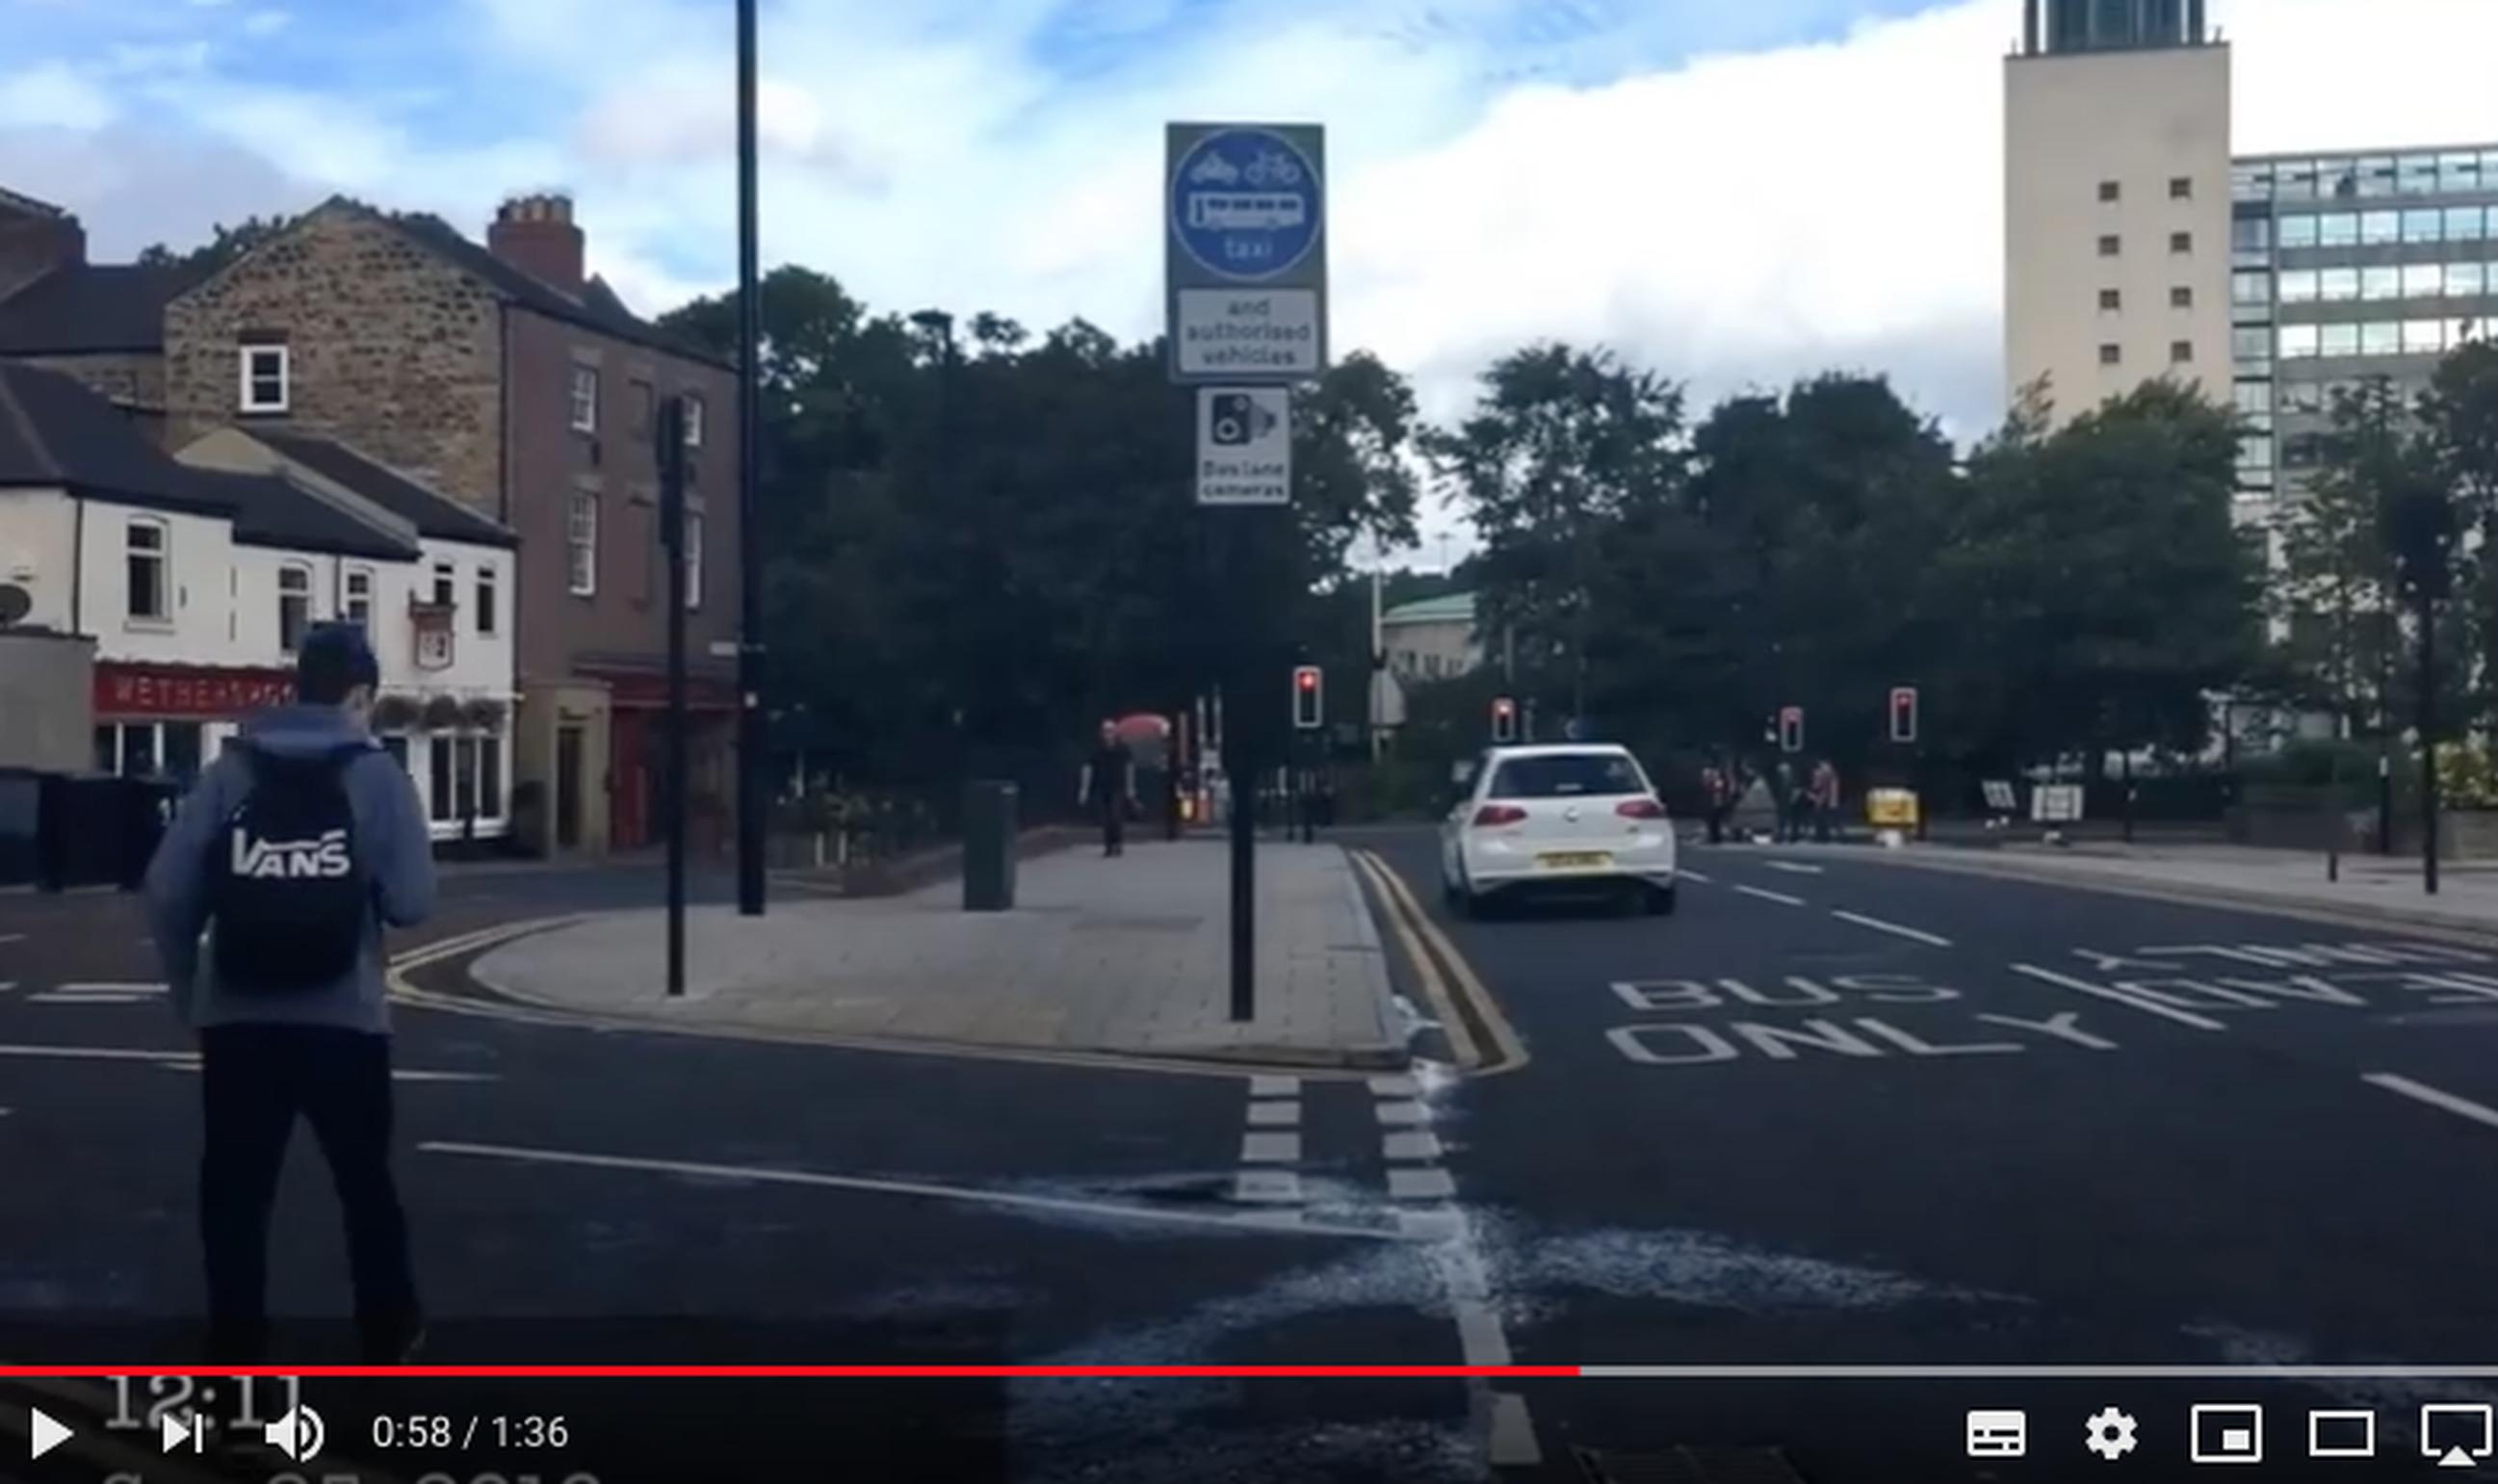 John Dobson Street: One disgruntled driver posted a video on YouTube after receiving a PCN